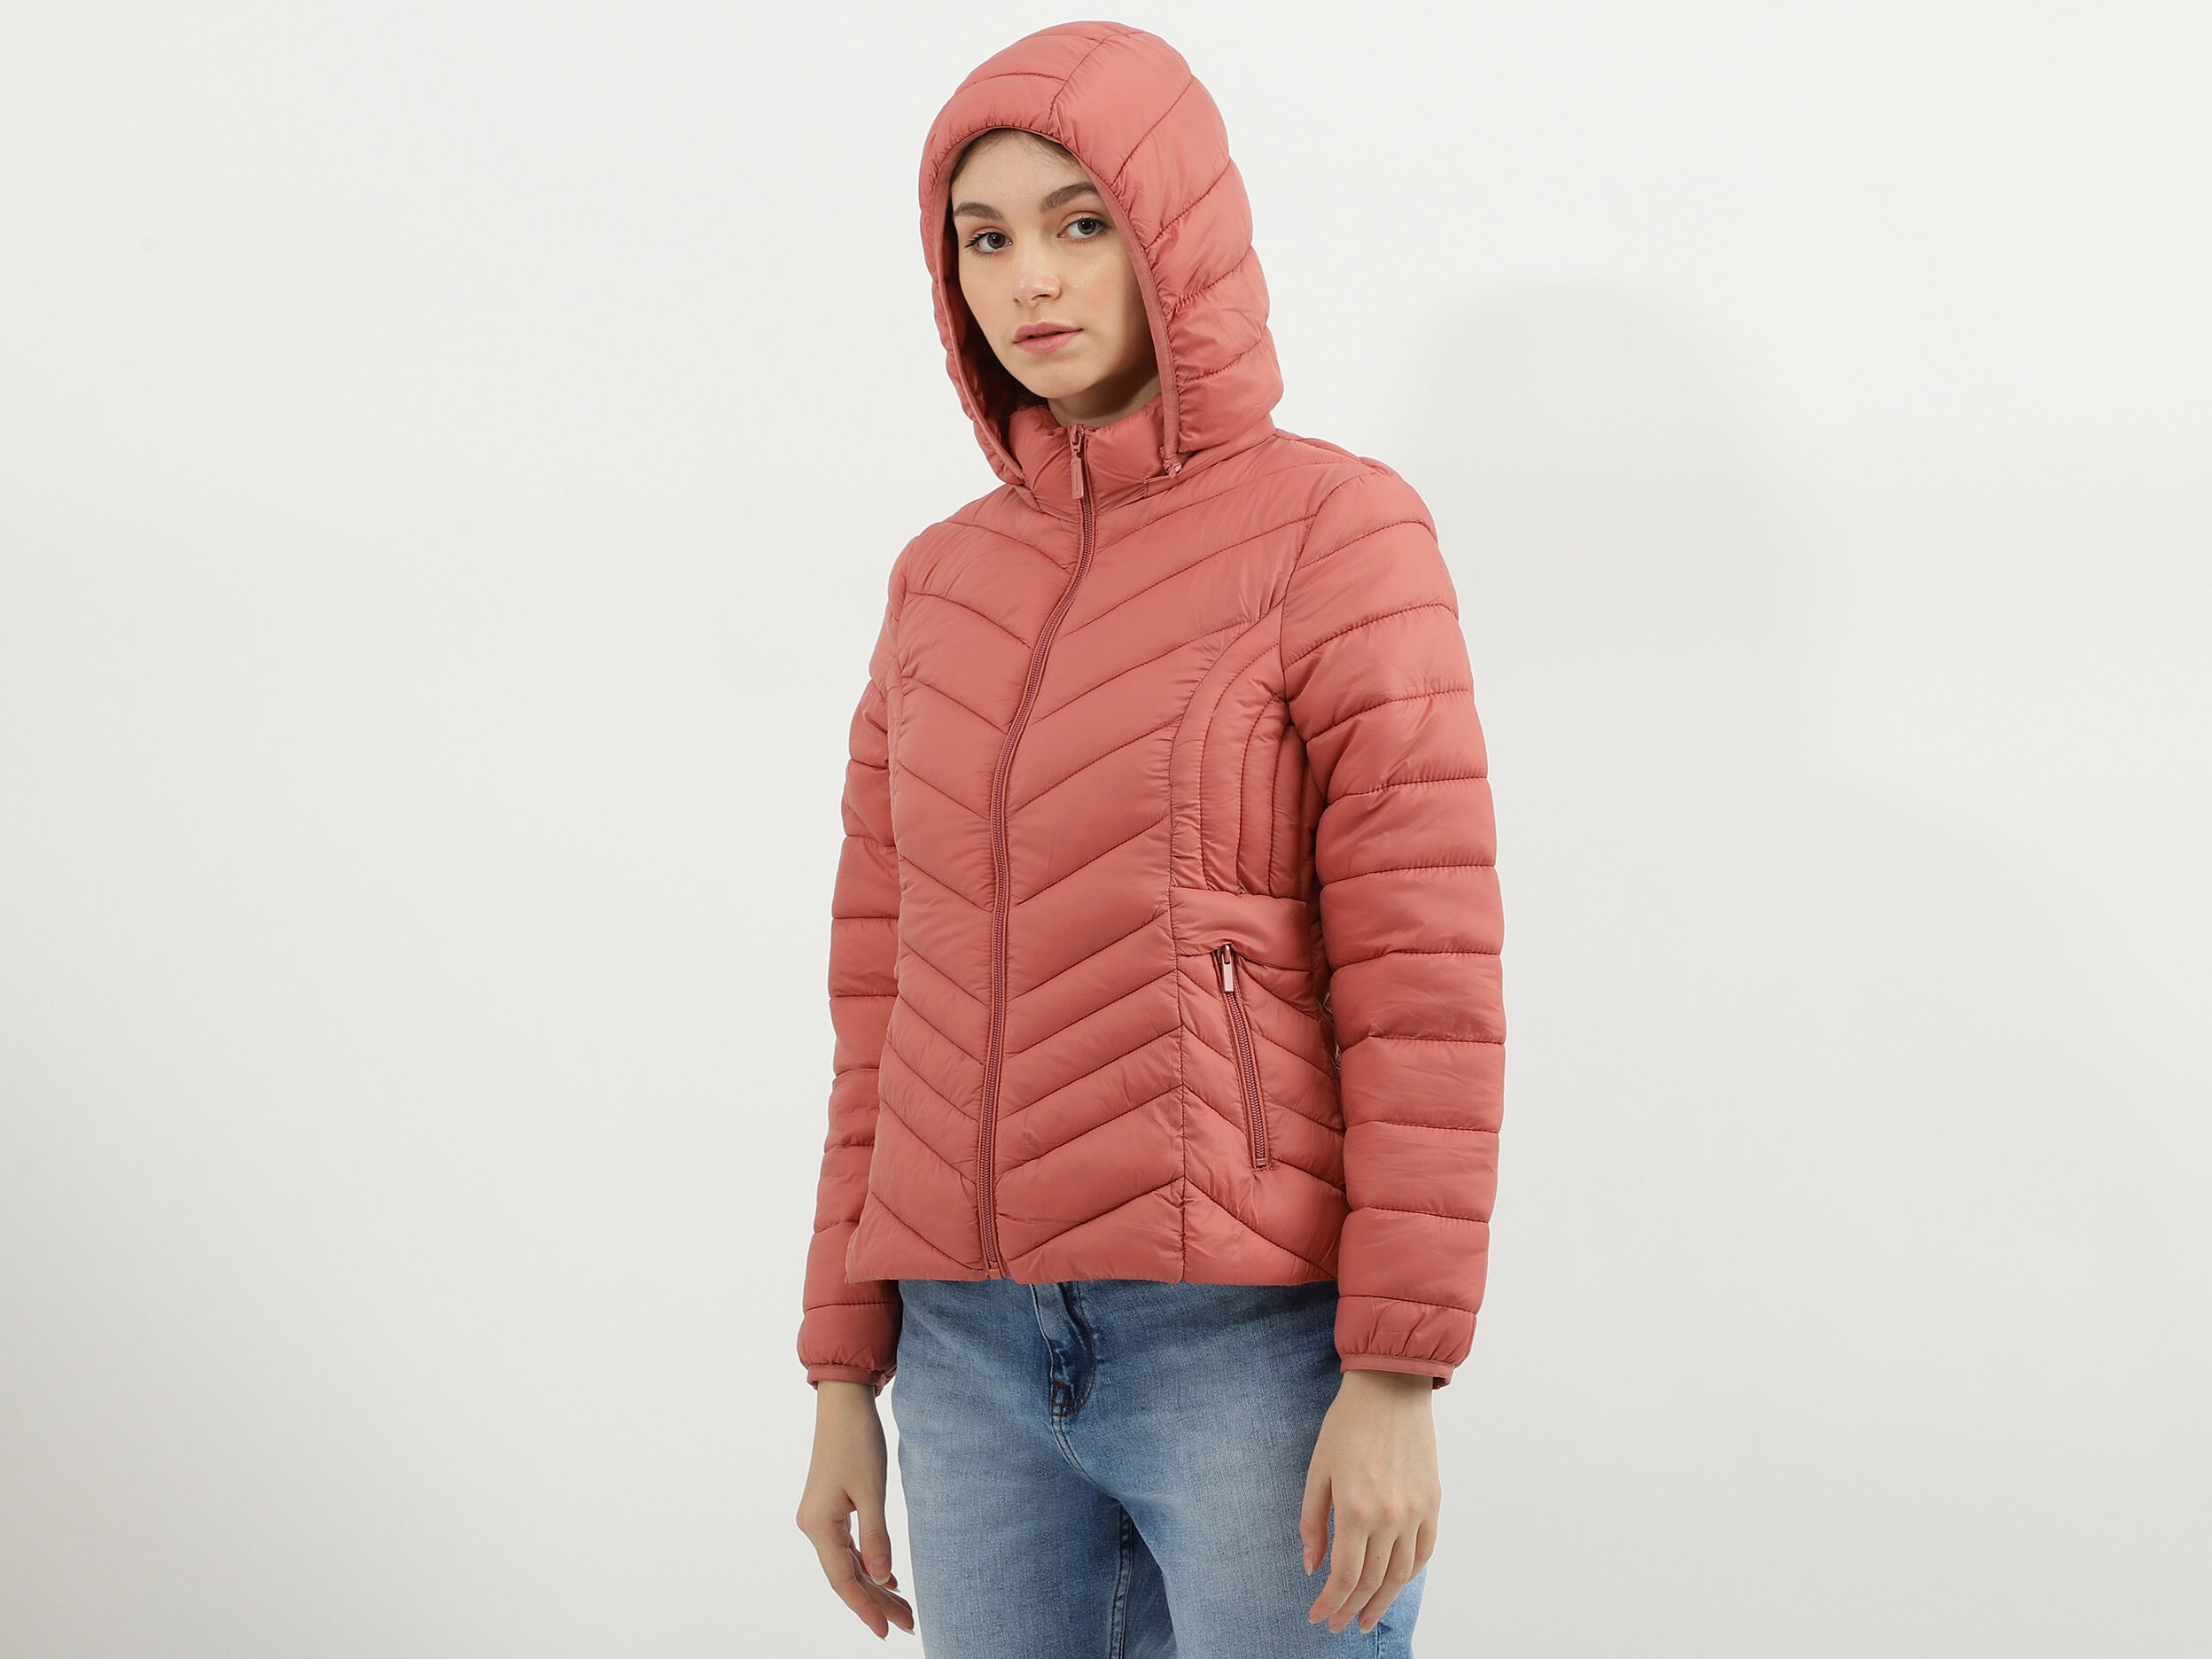 Girls Quilted High Neck Jacket - Pink | Benetton